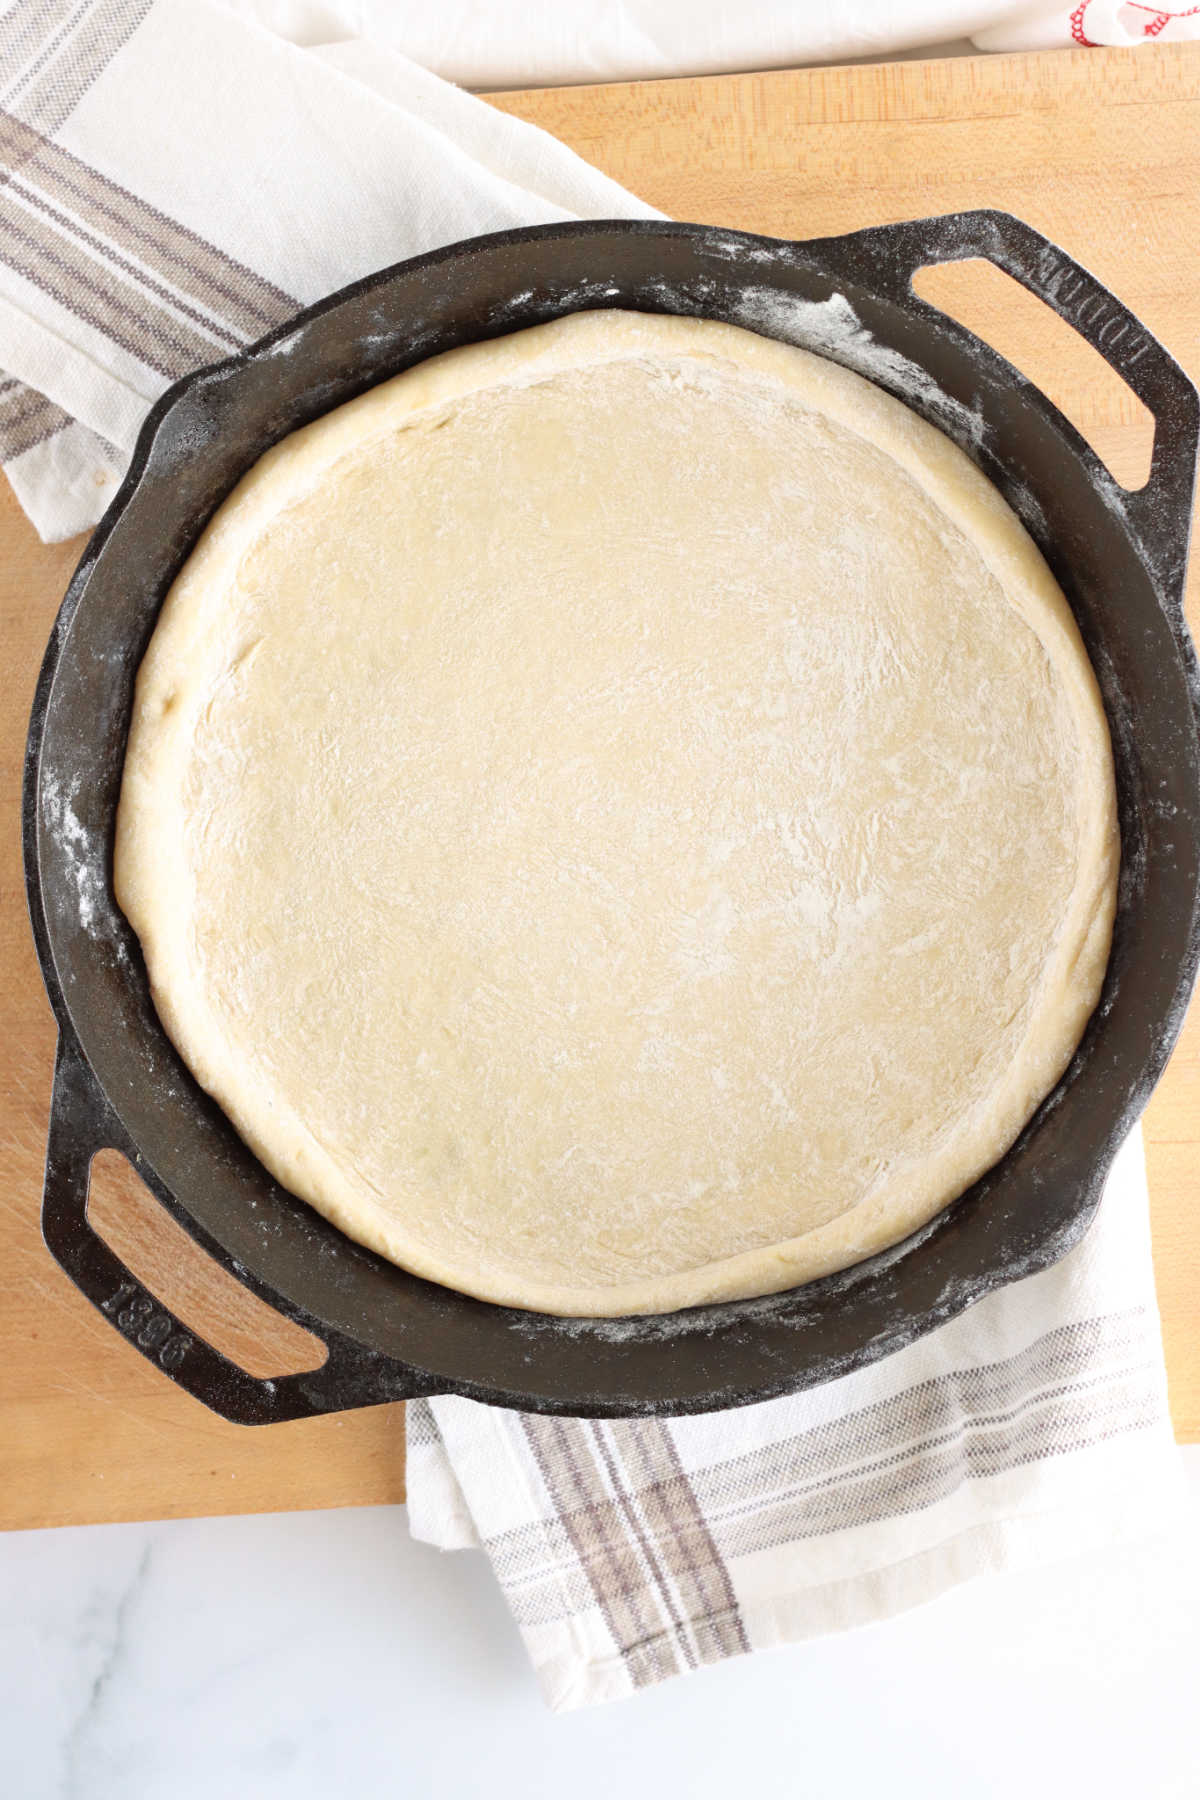 Pizza dough rising in cast iron skillet on wooden cutting board, kitchen towel underneath.